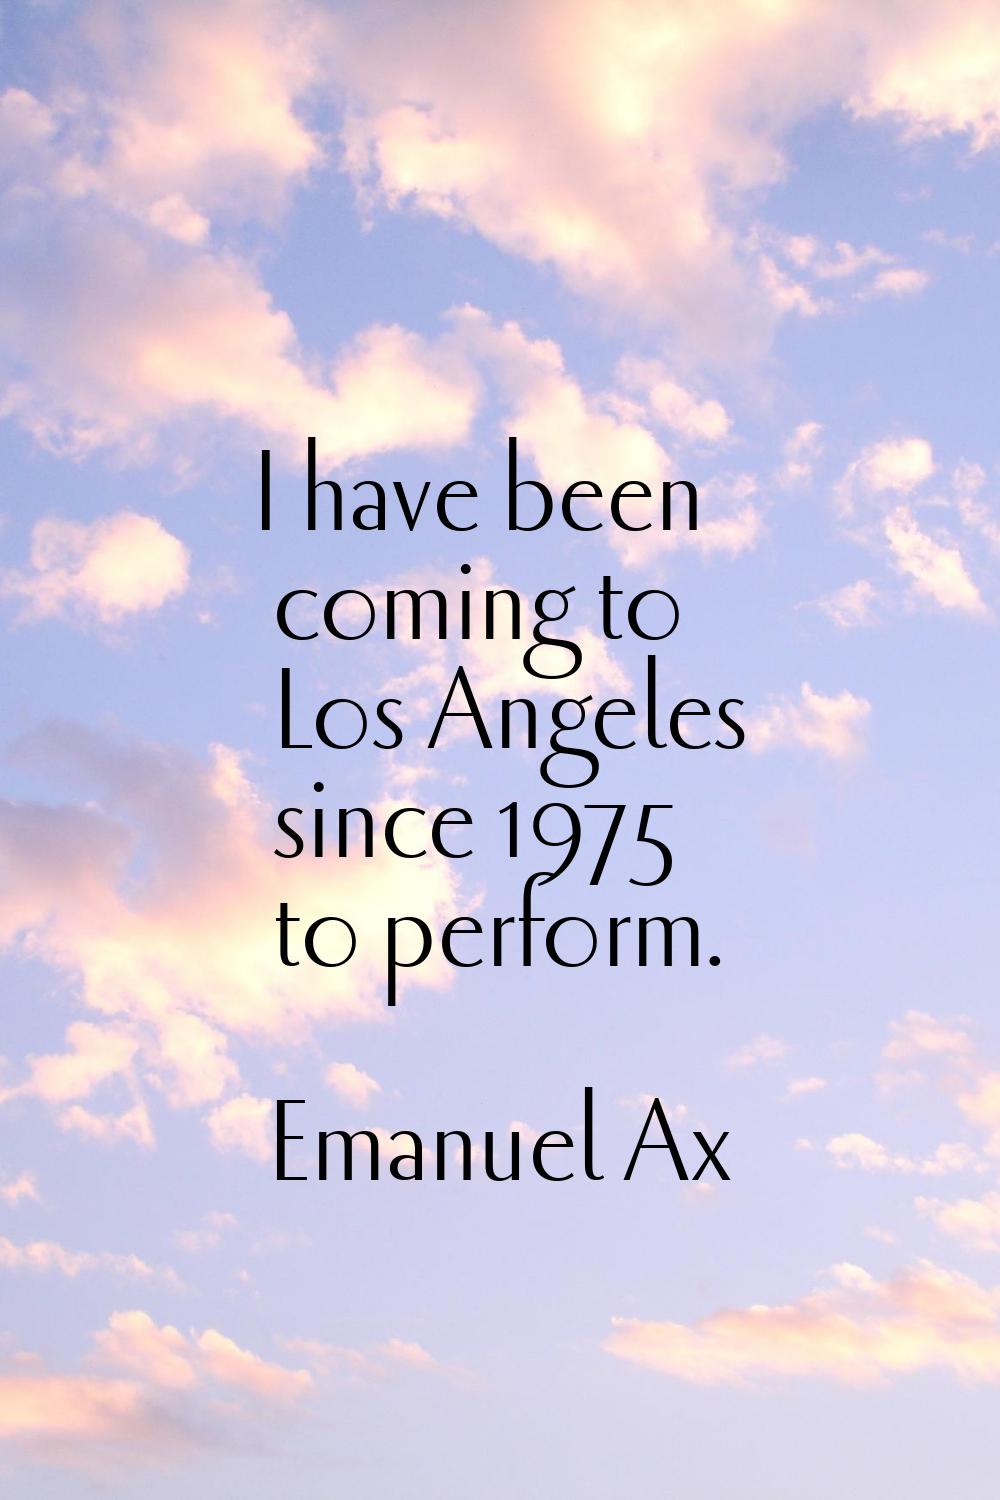 I have been coming to Los Angeles since 1975 to perform.